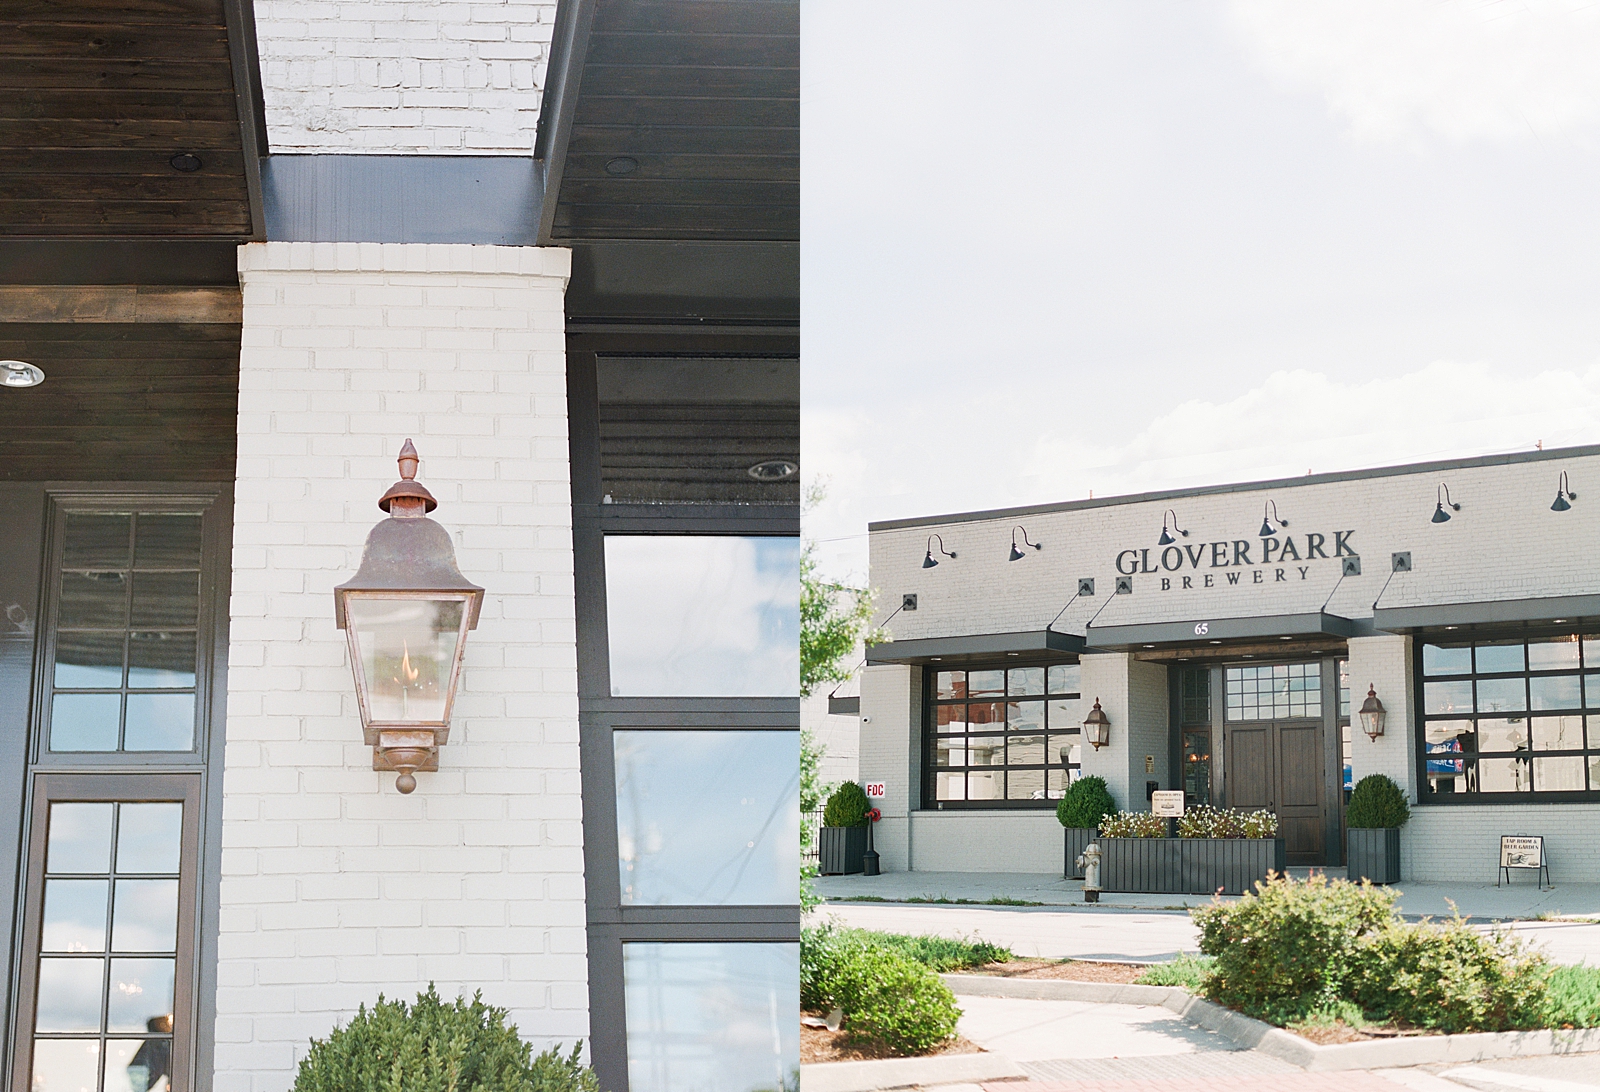 Glover Park Brewery Wedding Venue Lantern and front of building Photos